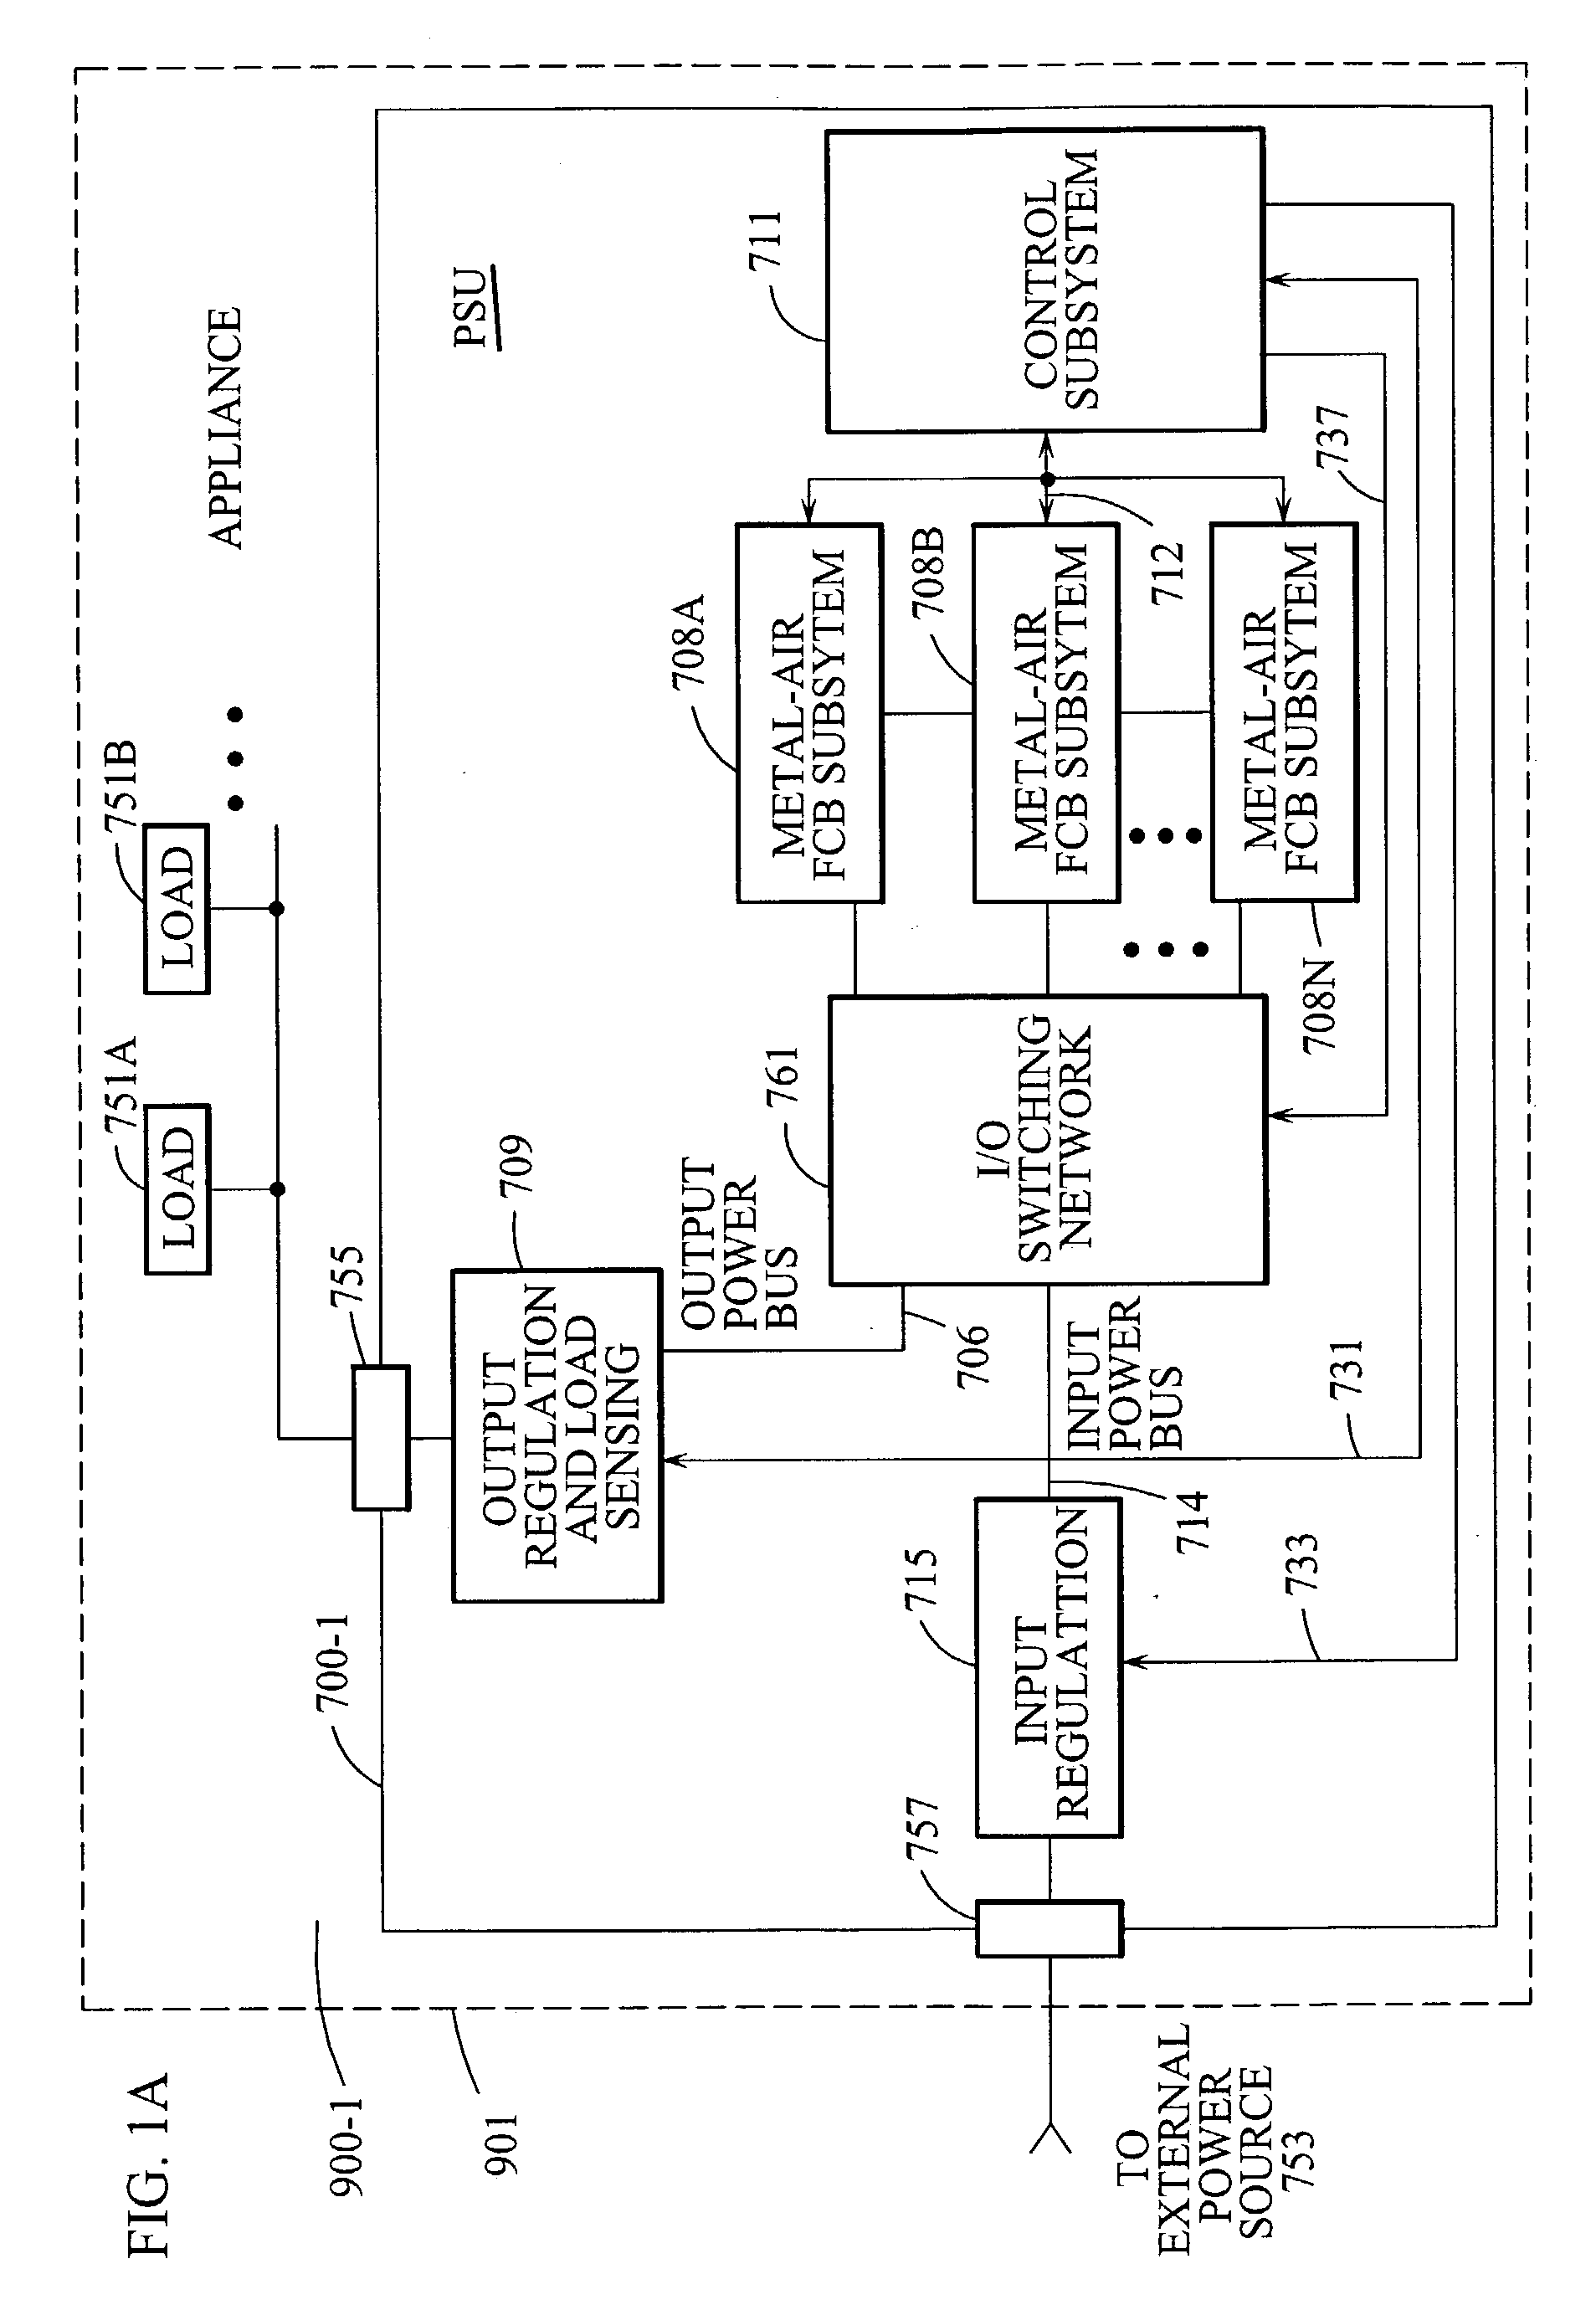 Appliance with refuelable and rechargeable metal-air fuel cell battery power supply unit integrated therein